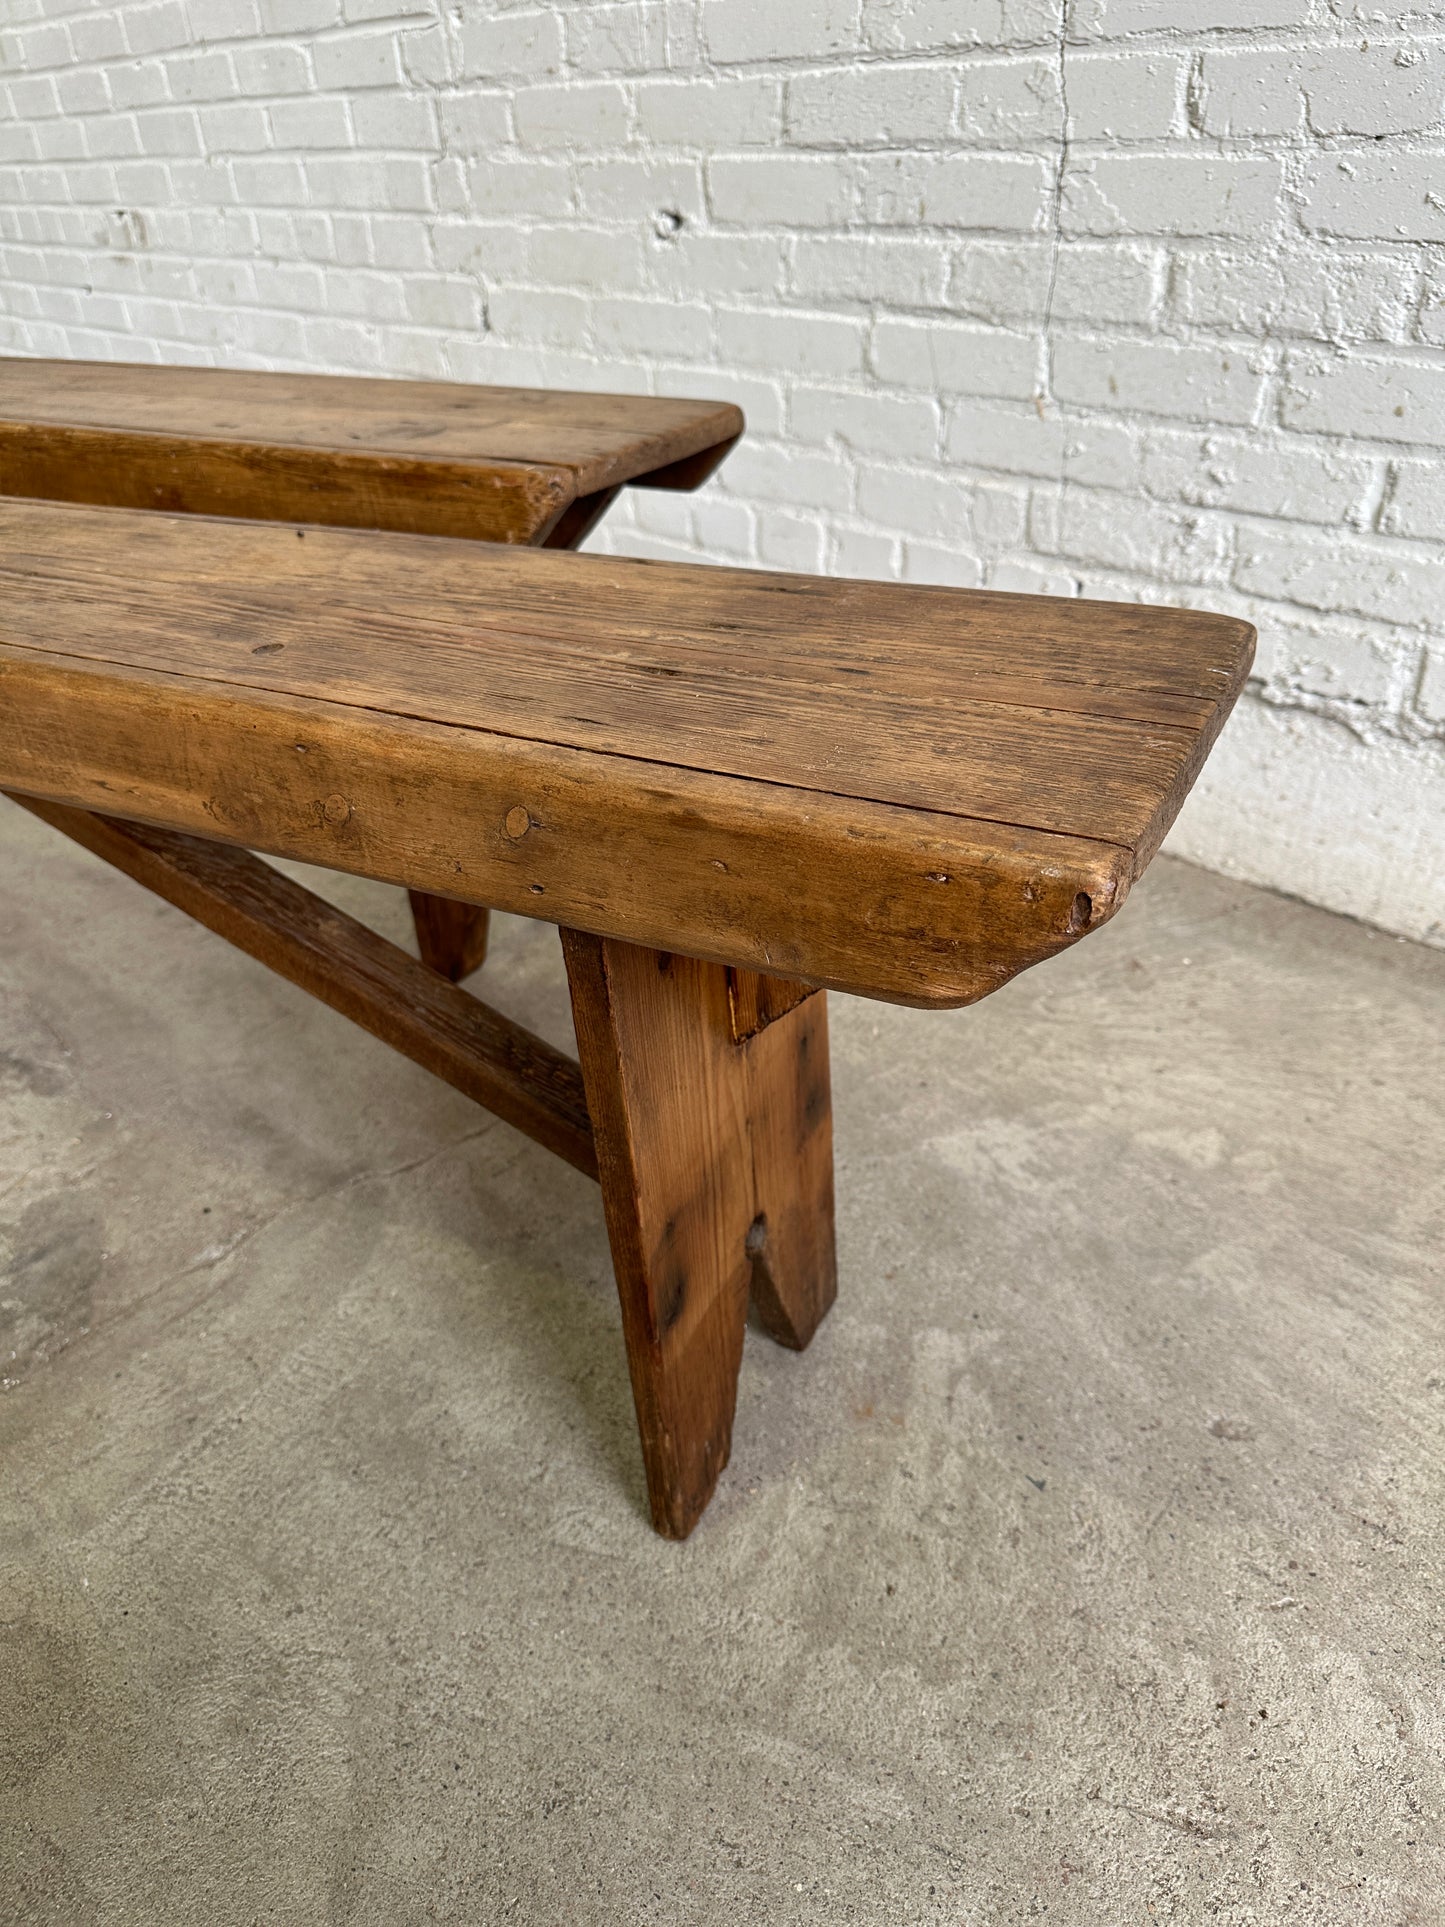 A Pair of 6-Foot English Antique Pine Benches c. 1875